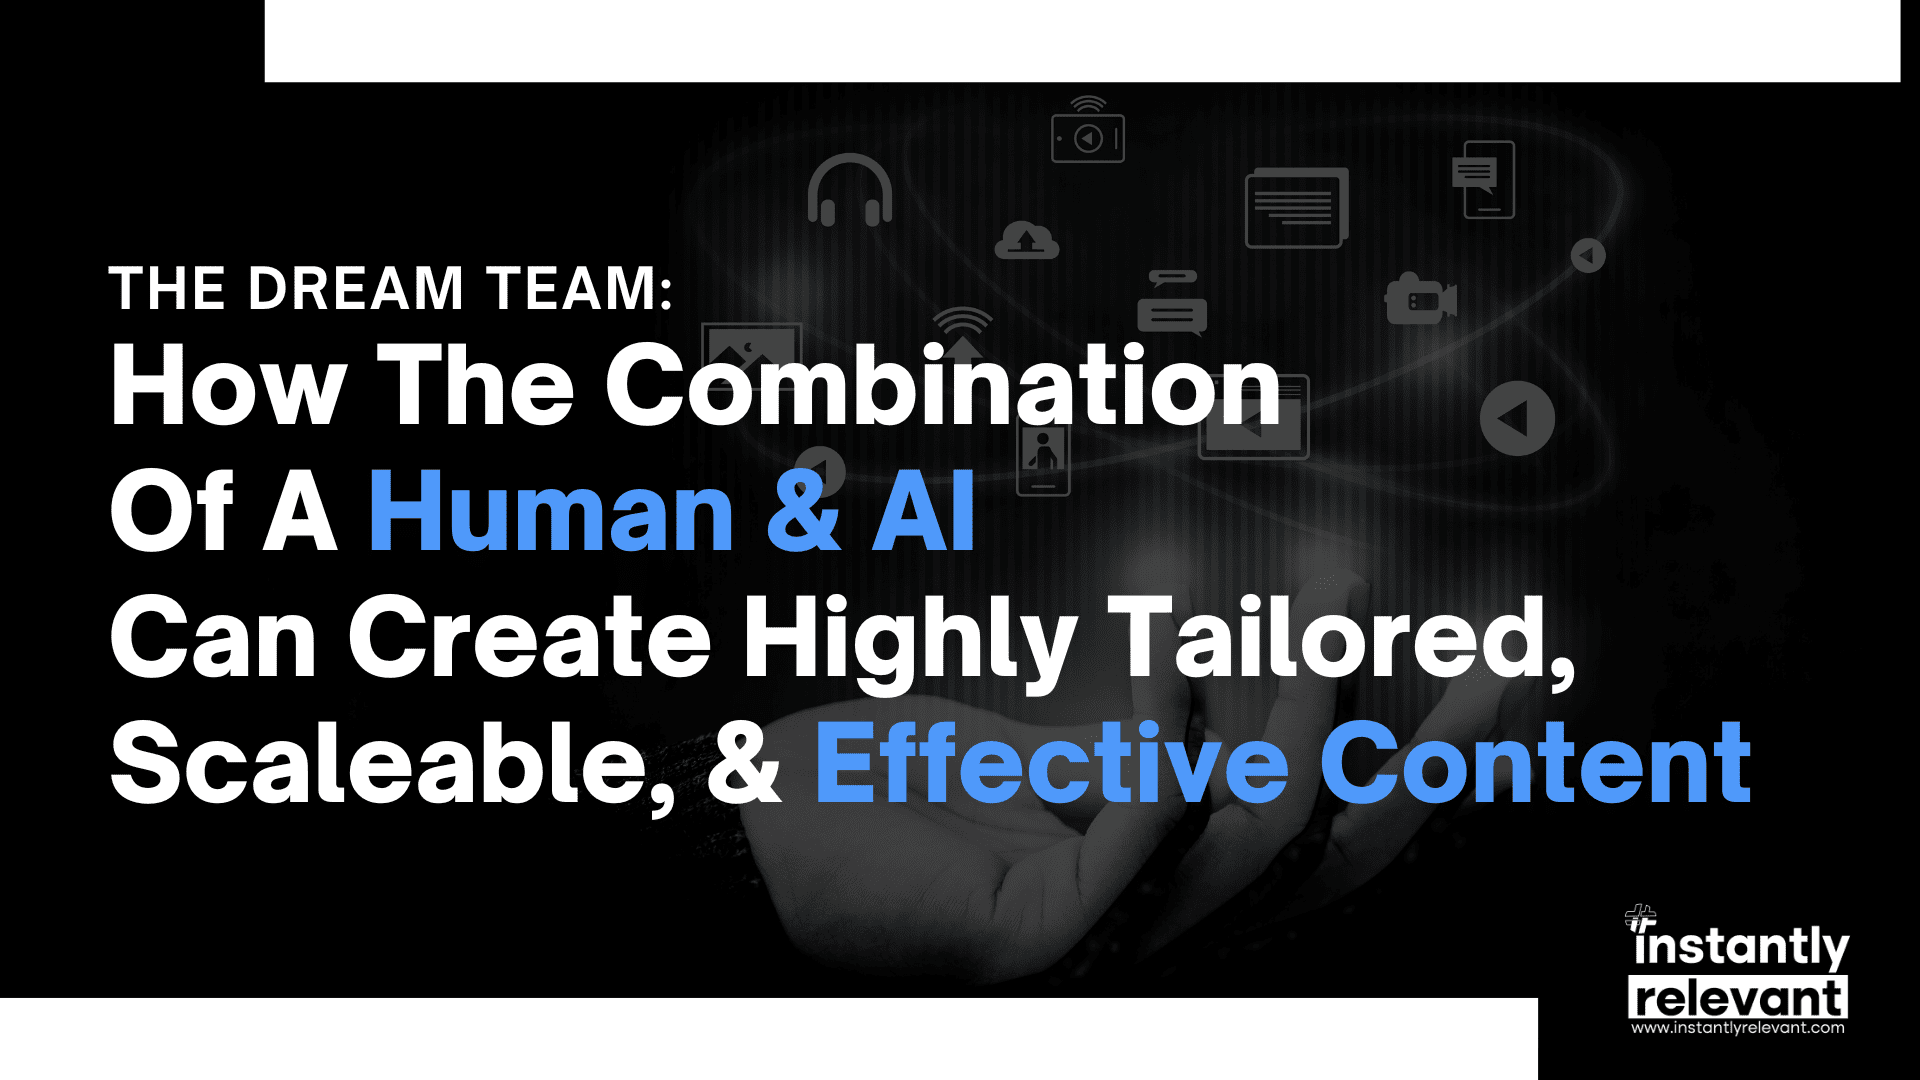 The Dream Team: How The Combination Of A Human & AI Can Create Highly Tailored, Scaleable, & Effective Content